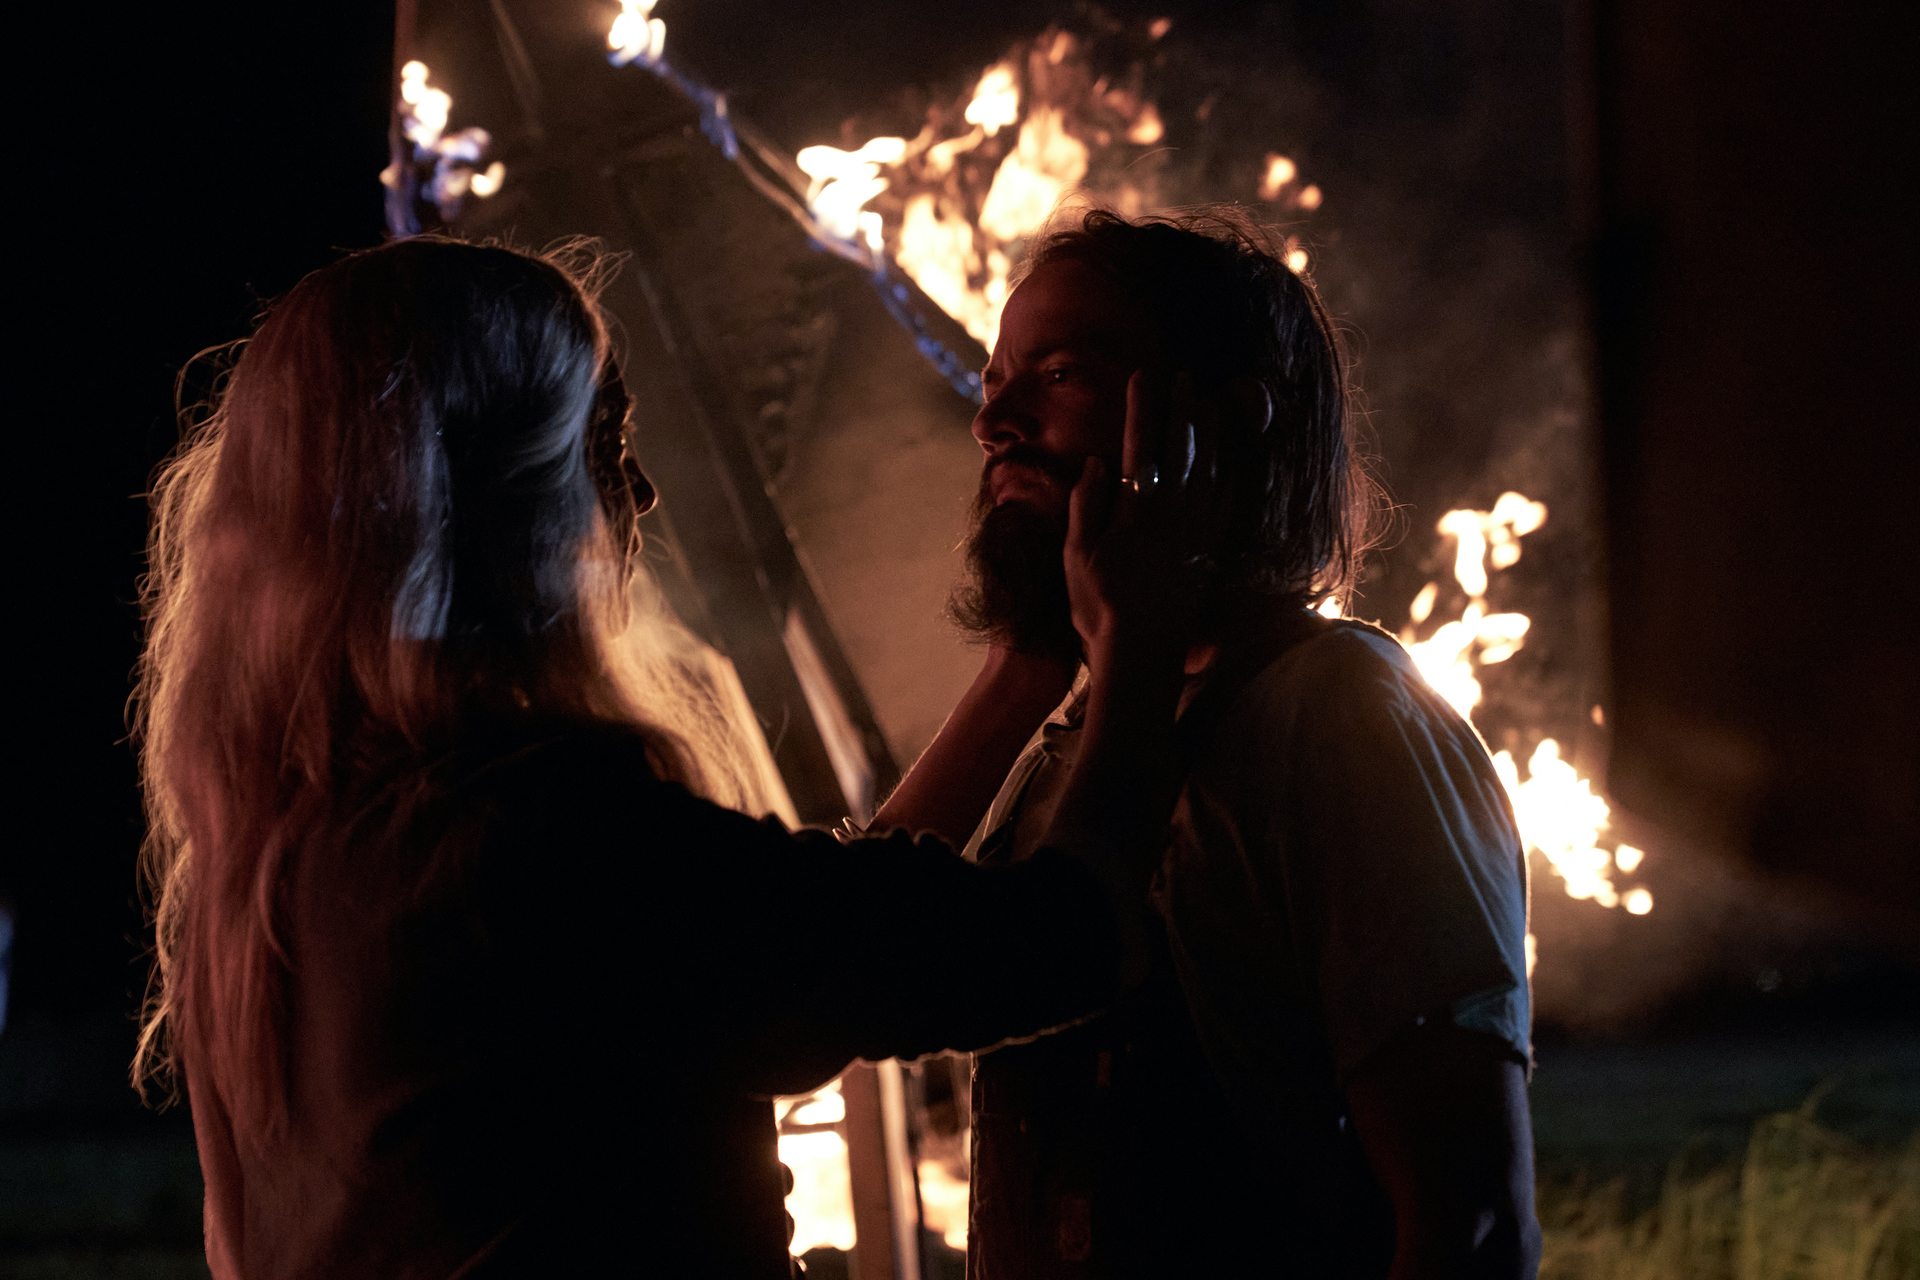 Caitlin McRill Fitzgerald holding Daniel Zovatto's face as a fire burns behind them in the darkness